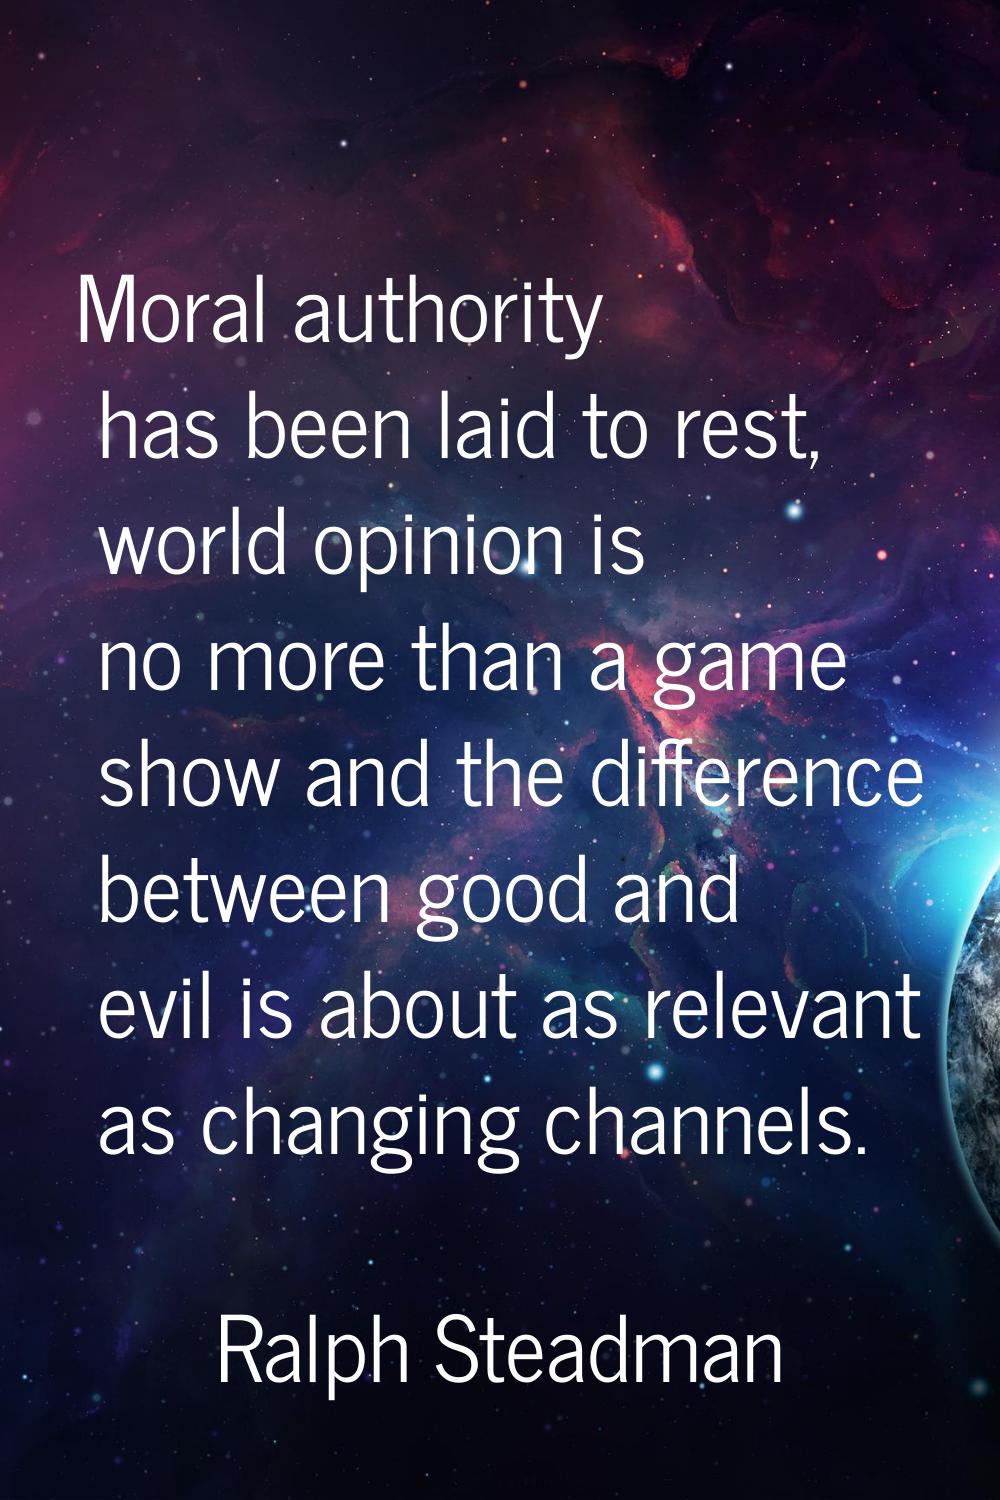 Moral authority has been laid to rest, world opinion is no more than a game show and the difference